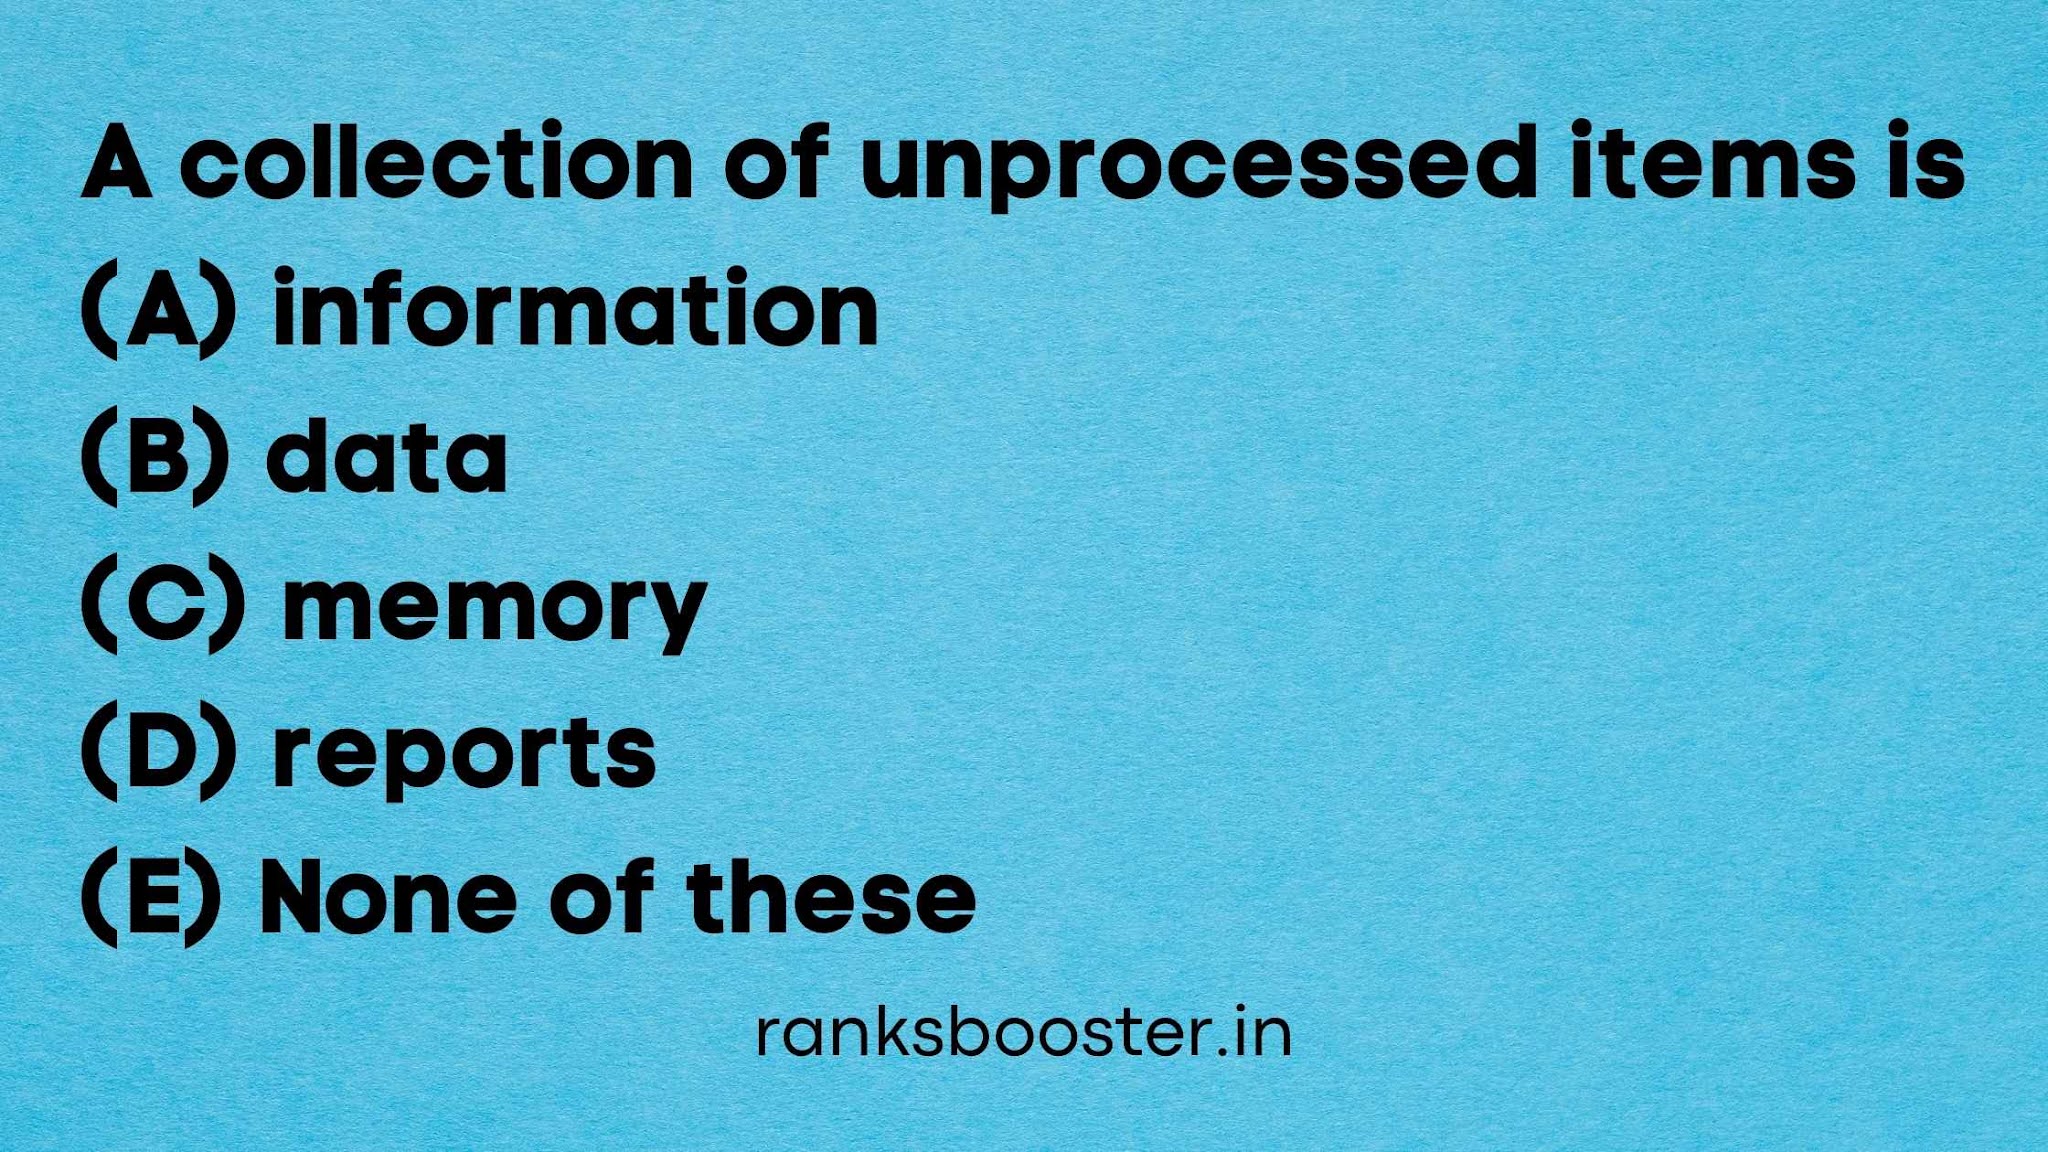 A collection of unprocessed items is (A) information (B) data (C) memory (D) reports (E) None of these